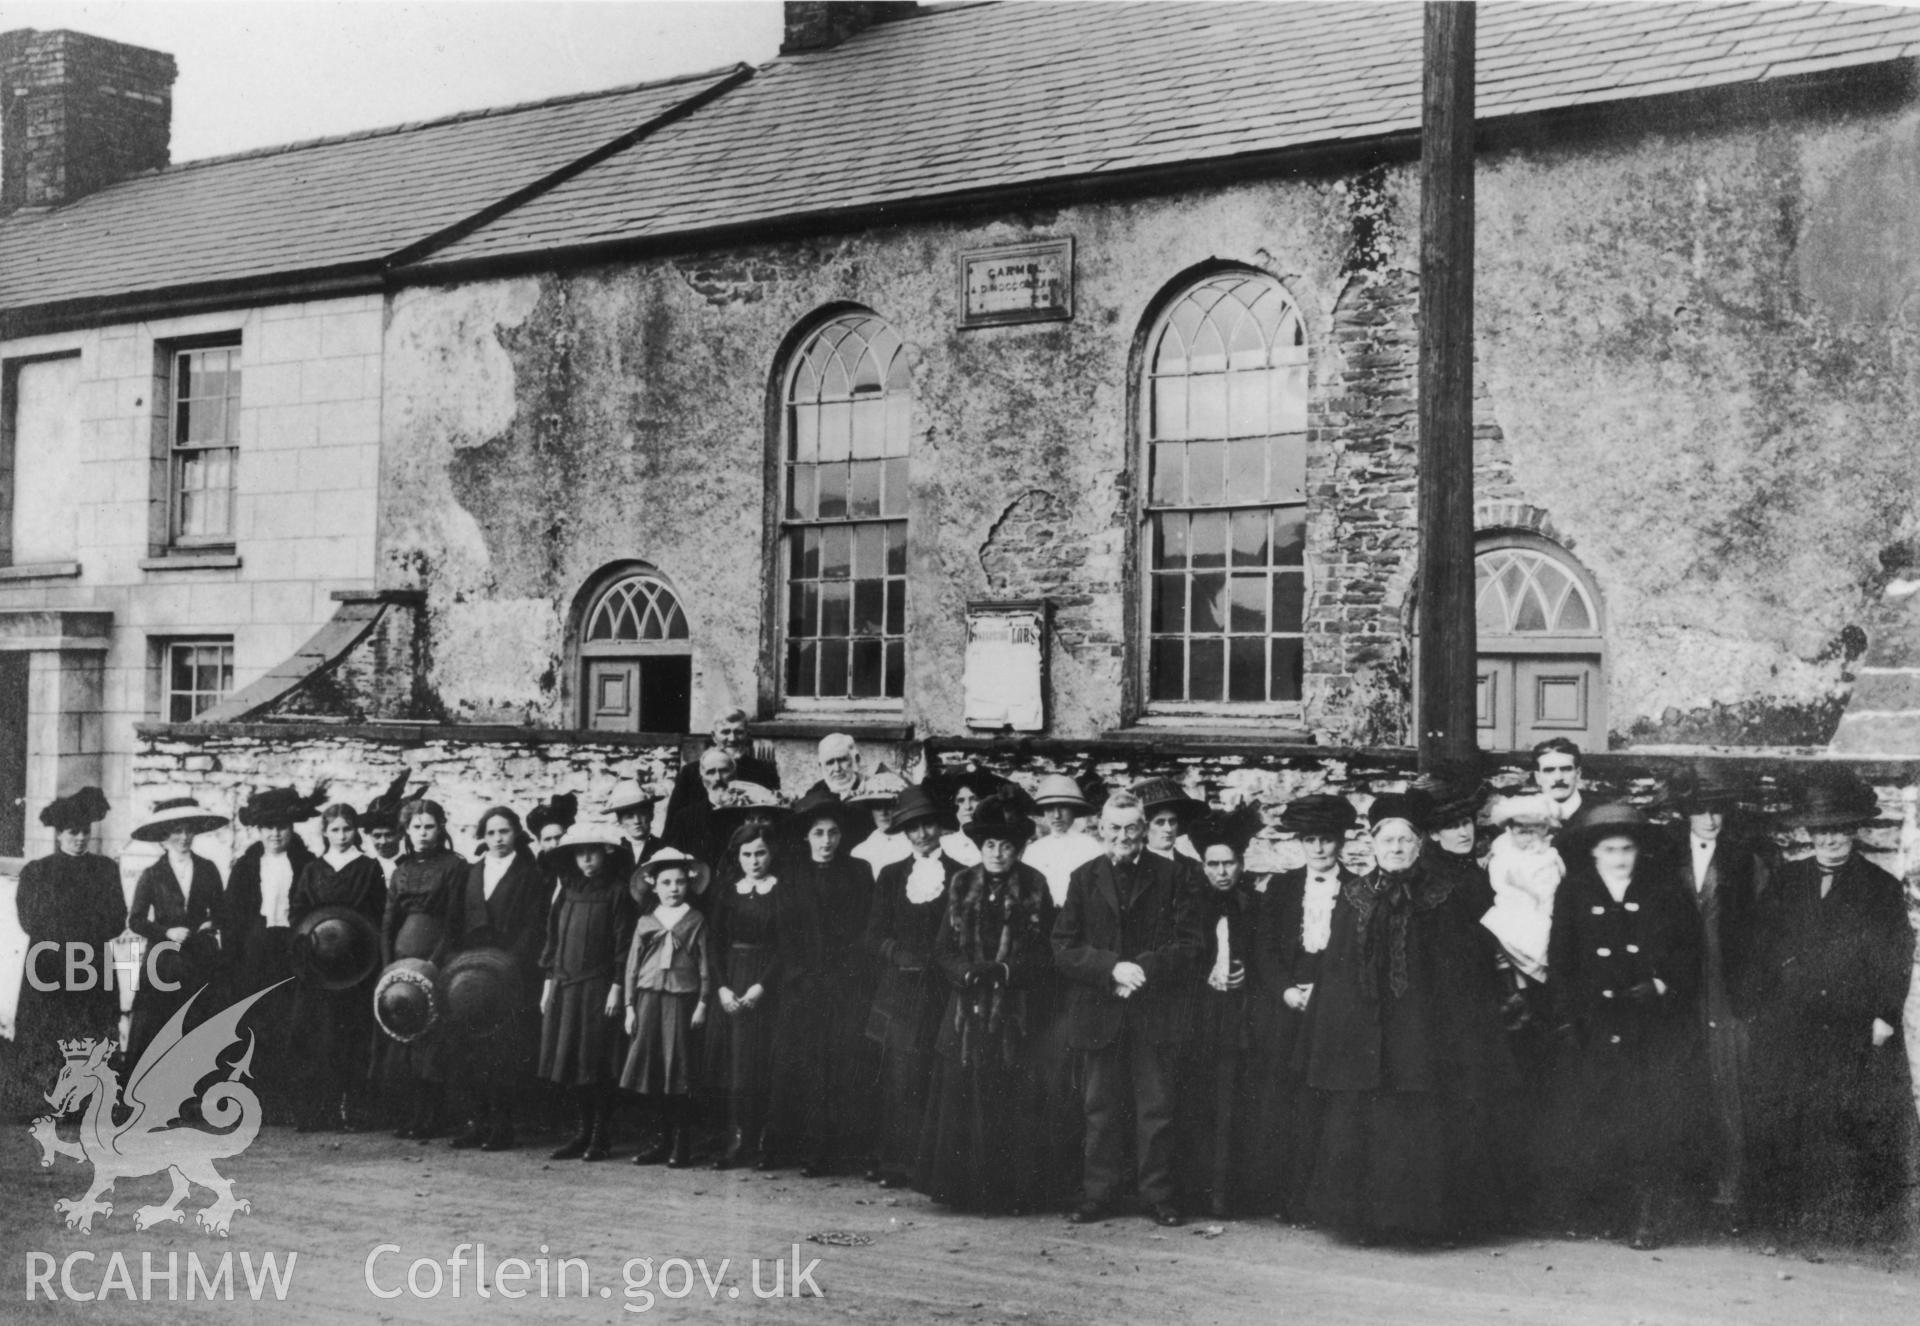 Photograph showing congregation outside Carmel CM chapel, Upper Boat. Dated early 20th century.